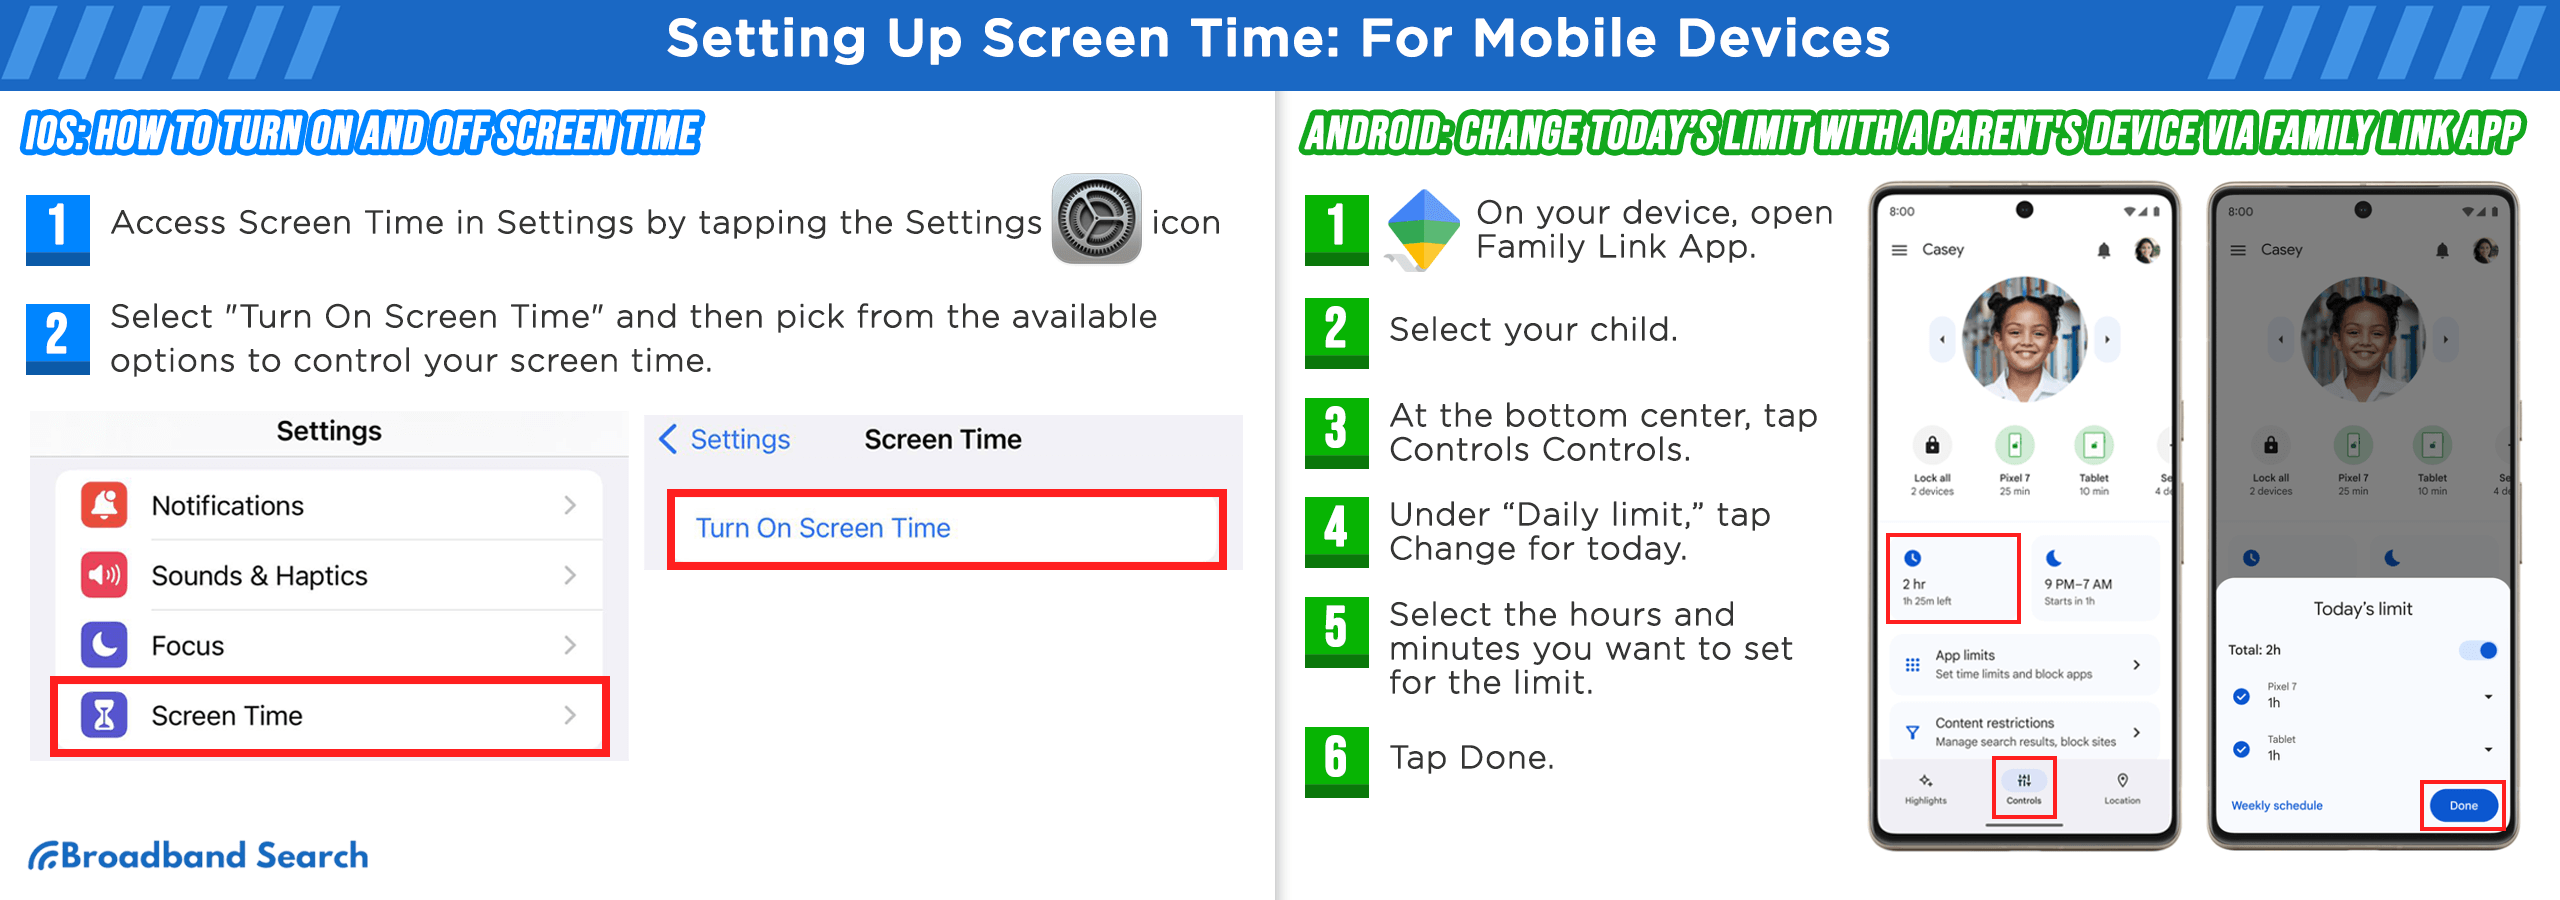 Steps on setting up screen time for mobile devices